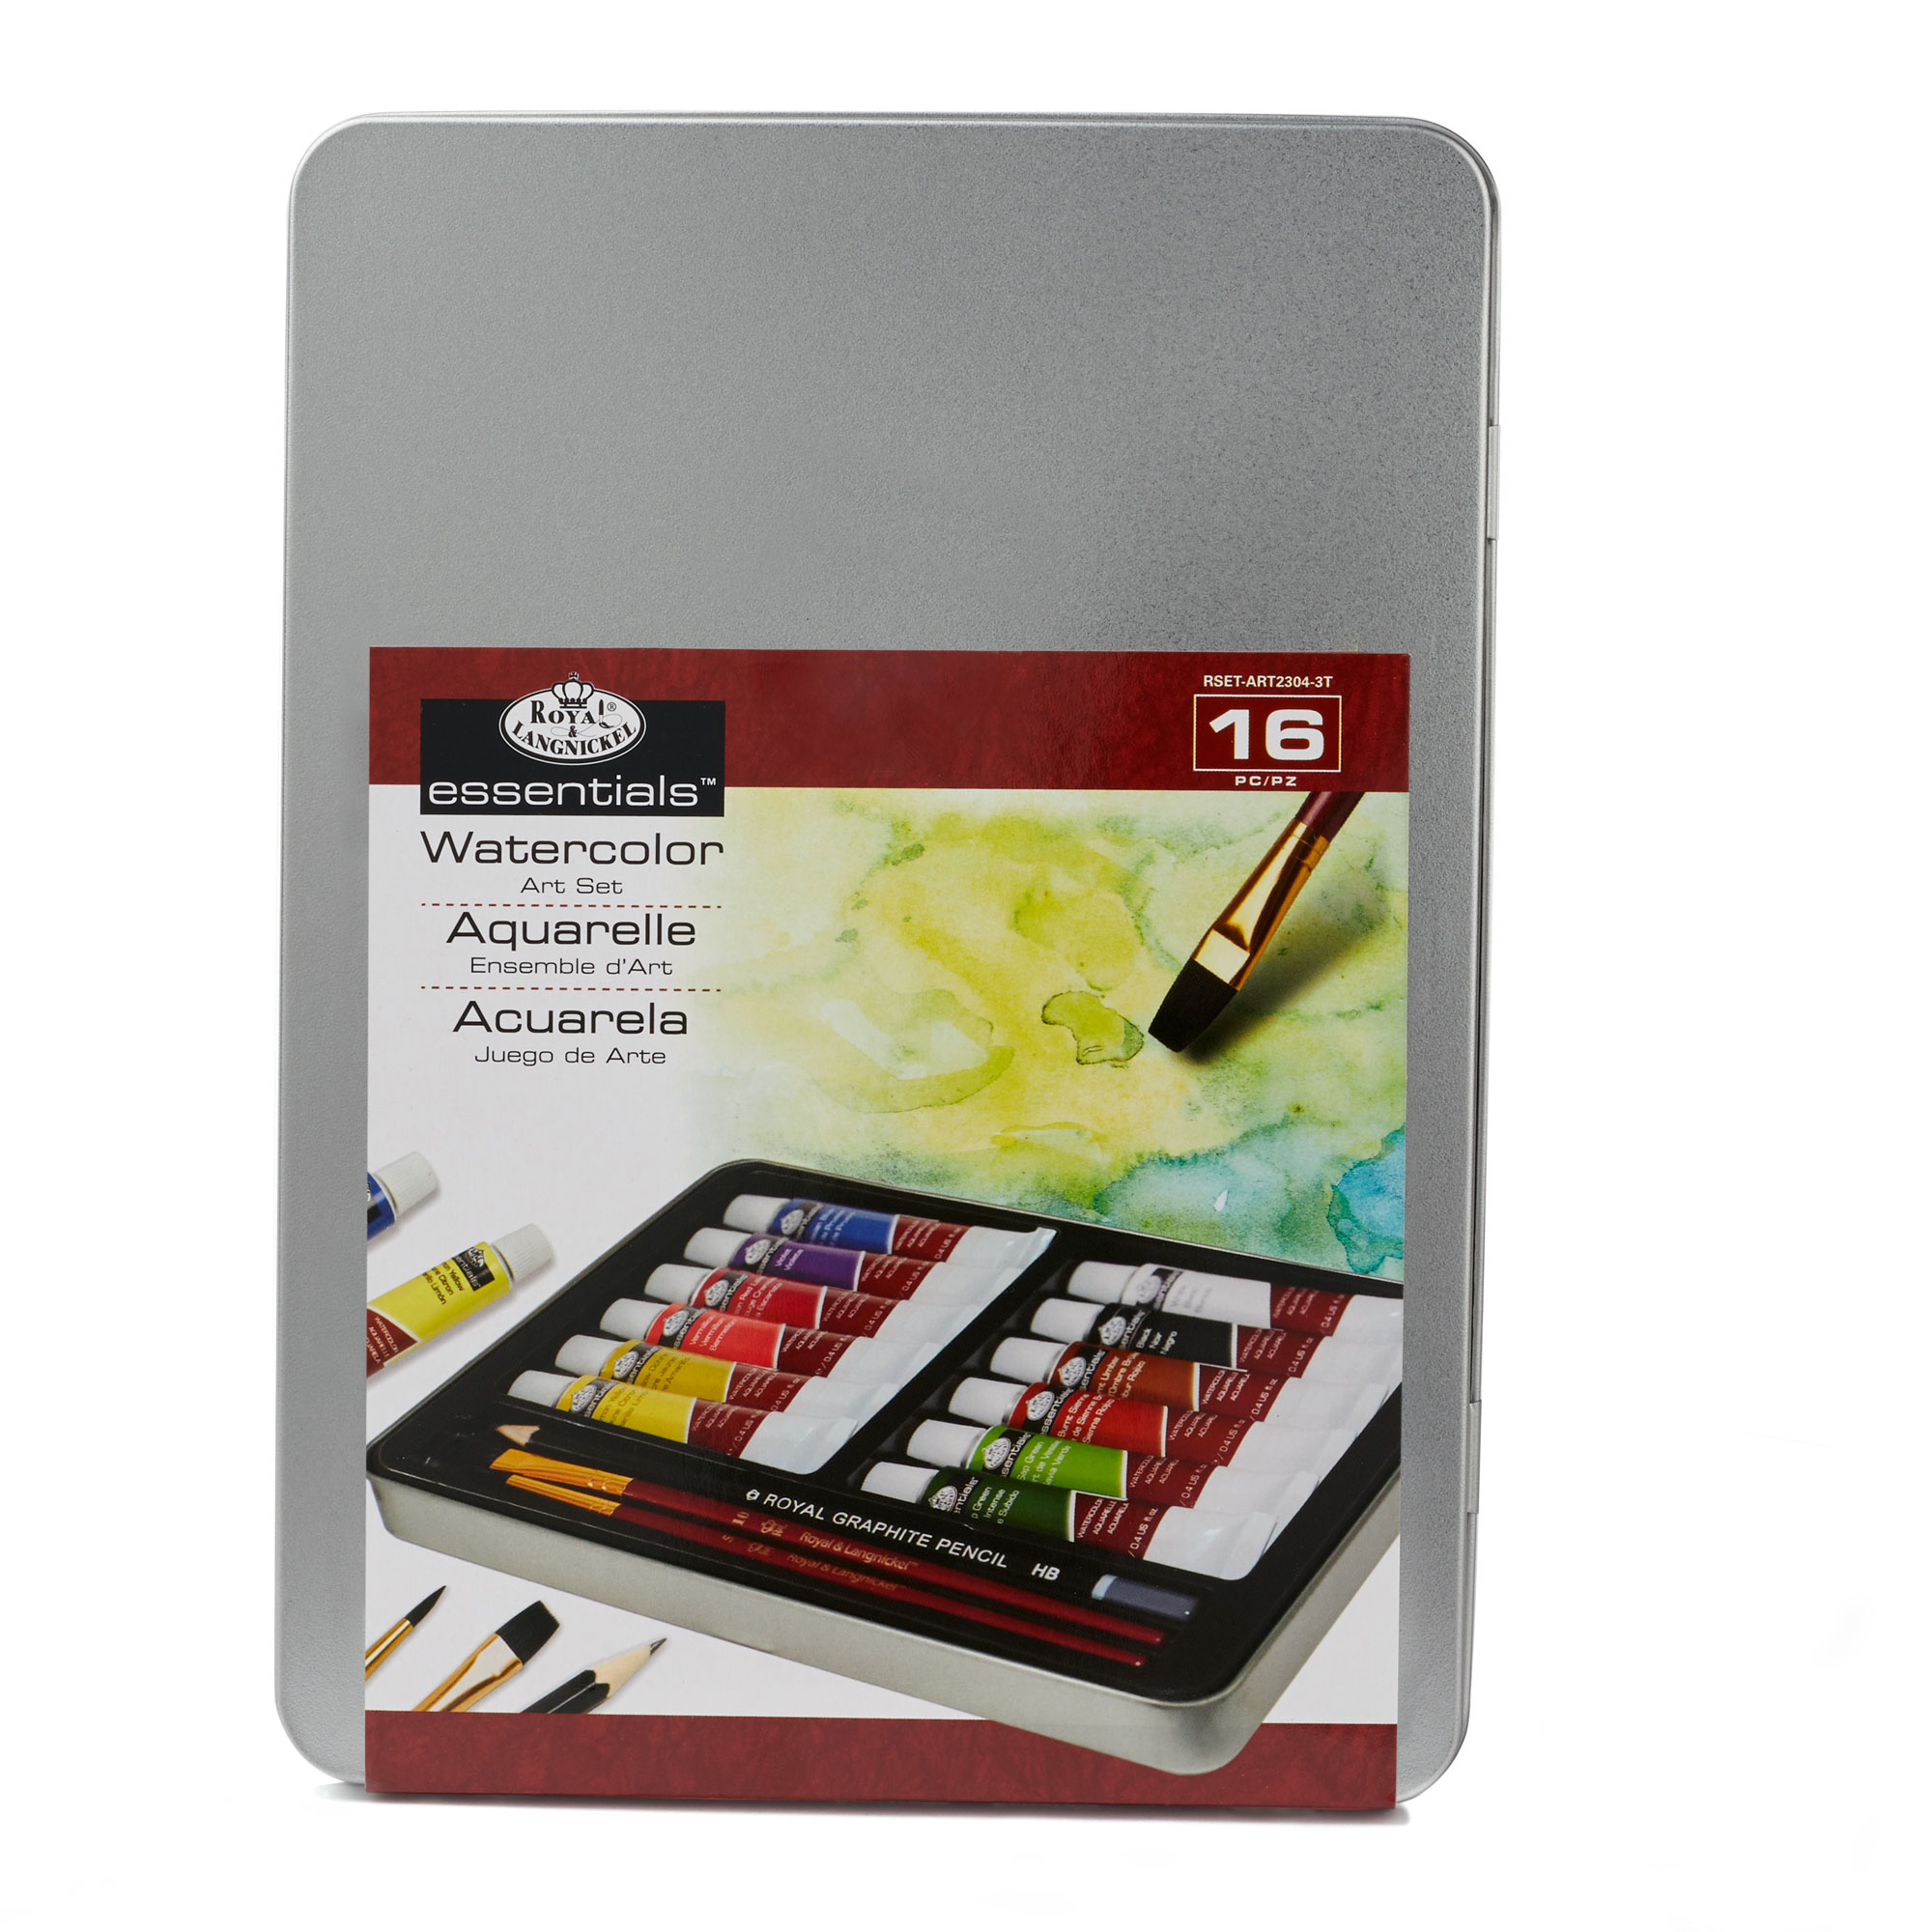 Canson XL Watercolor Paper Pad 12X18 30 Sheets